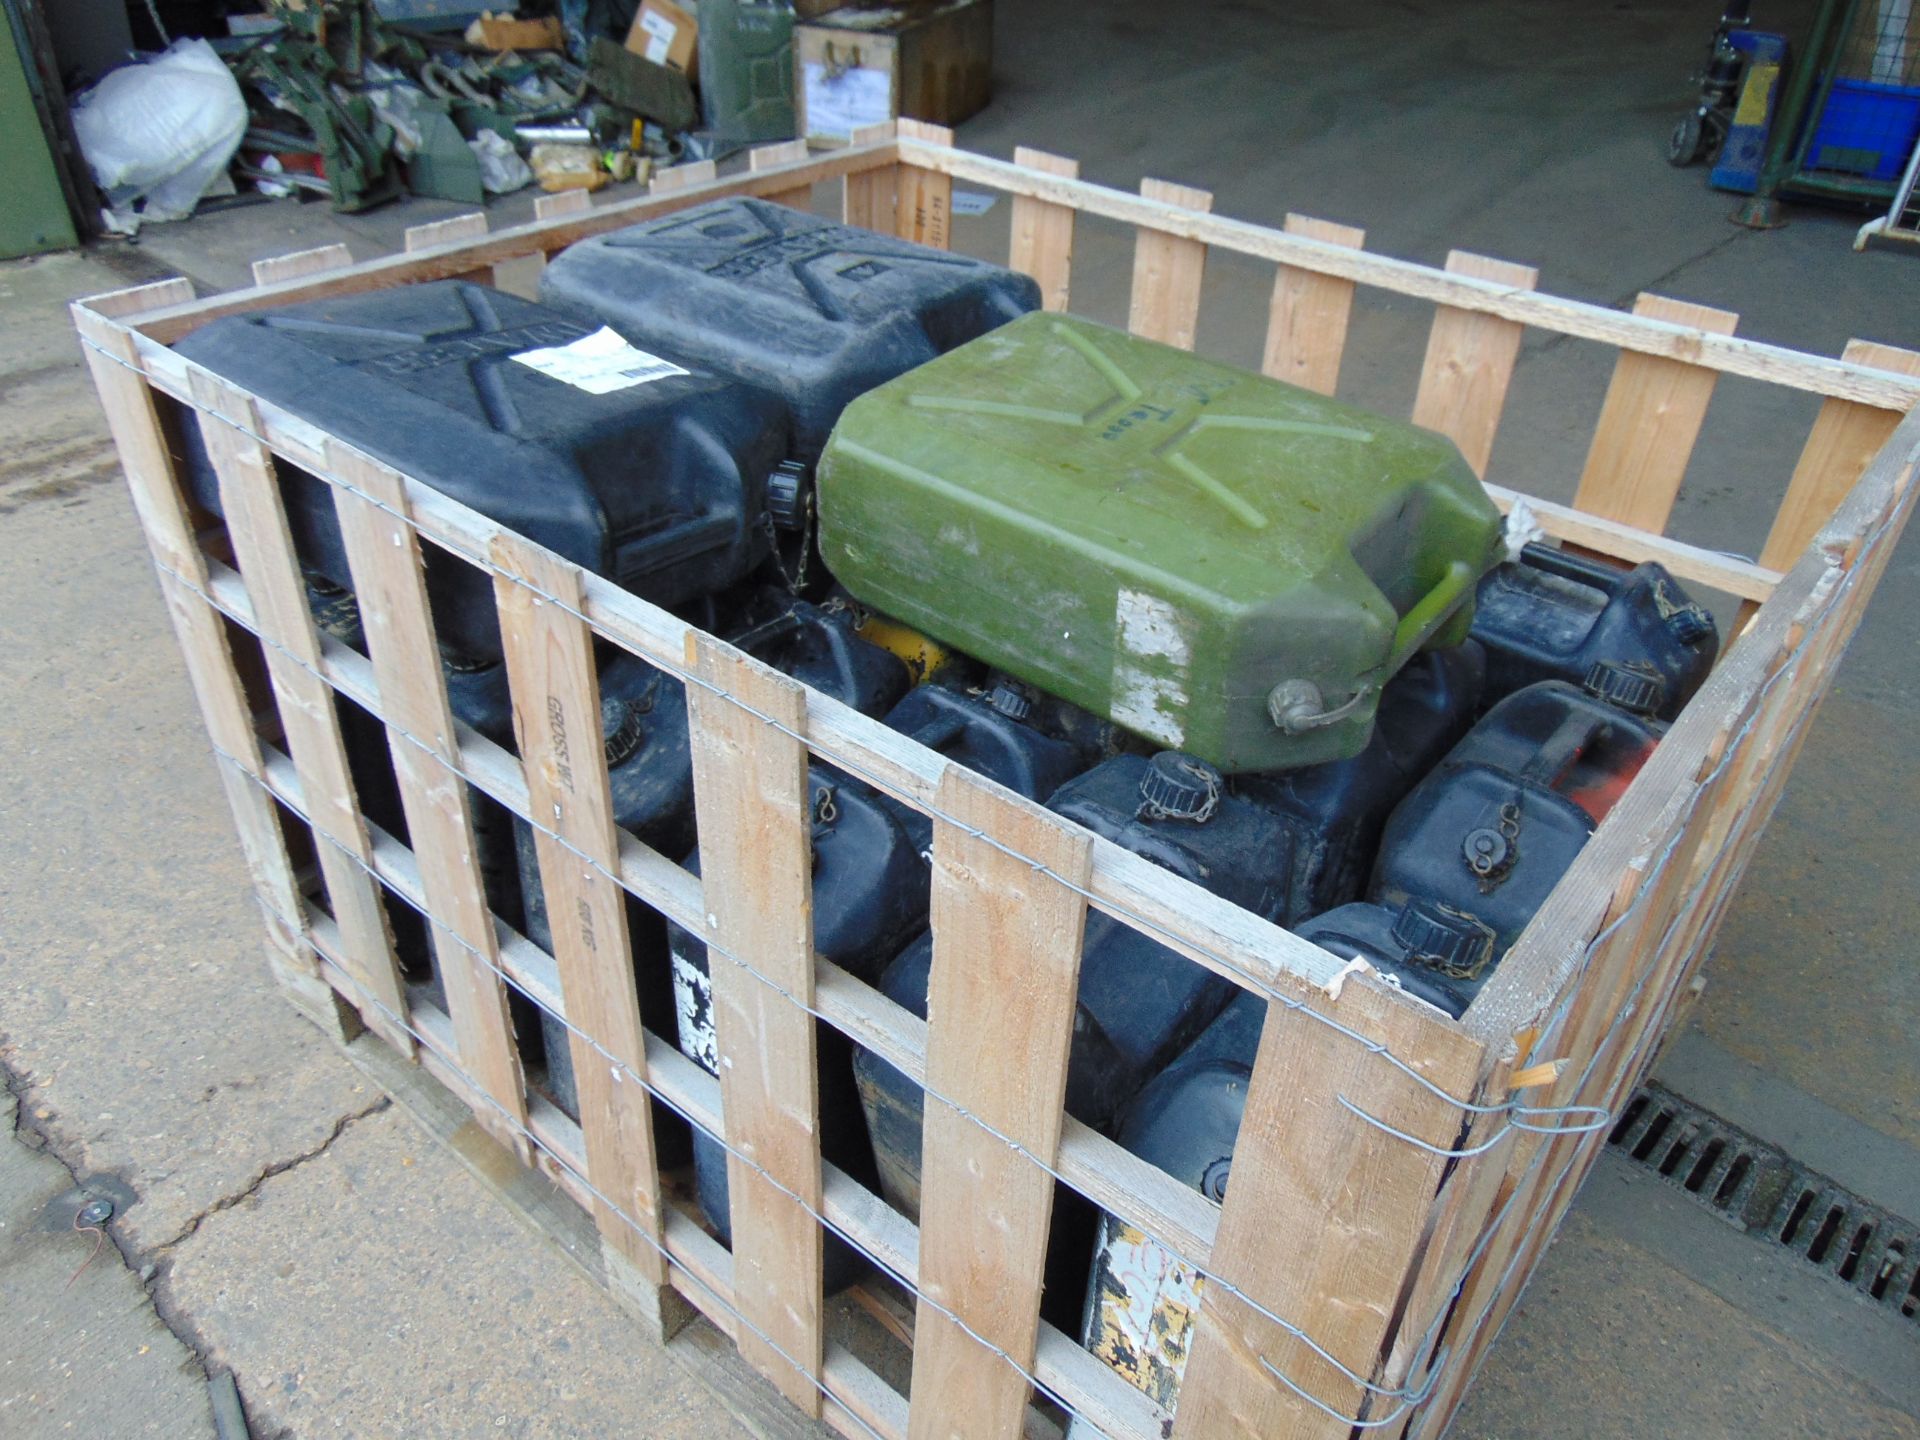 1 x Stillage of 18 x 5 Gall Water Jerry Cans with Caps (Stillage is Included)